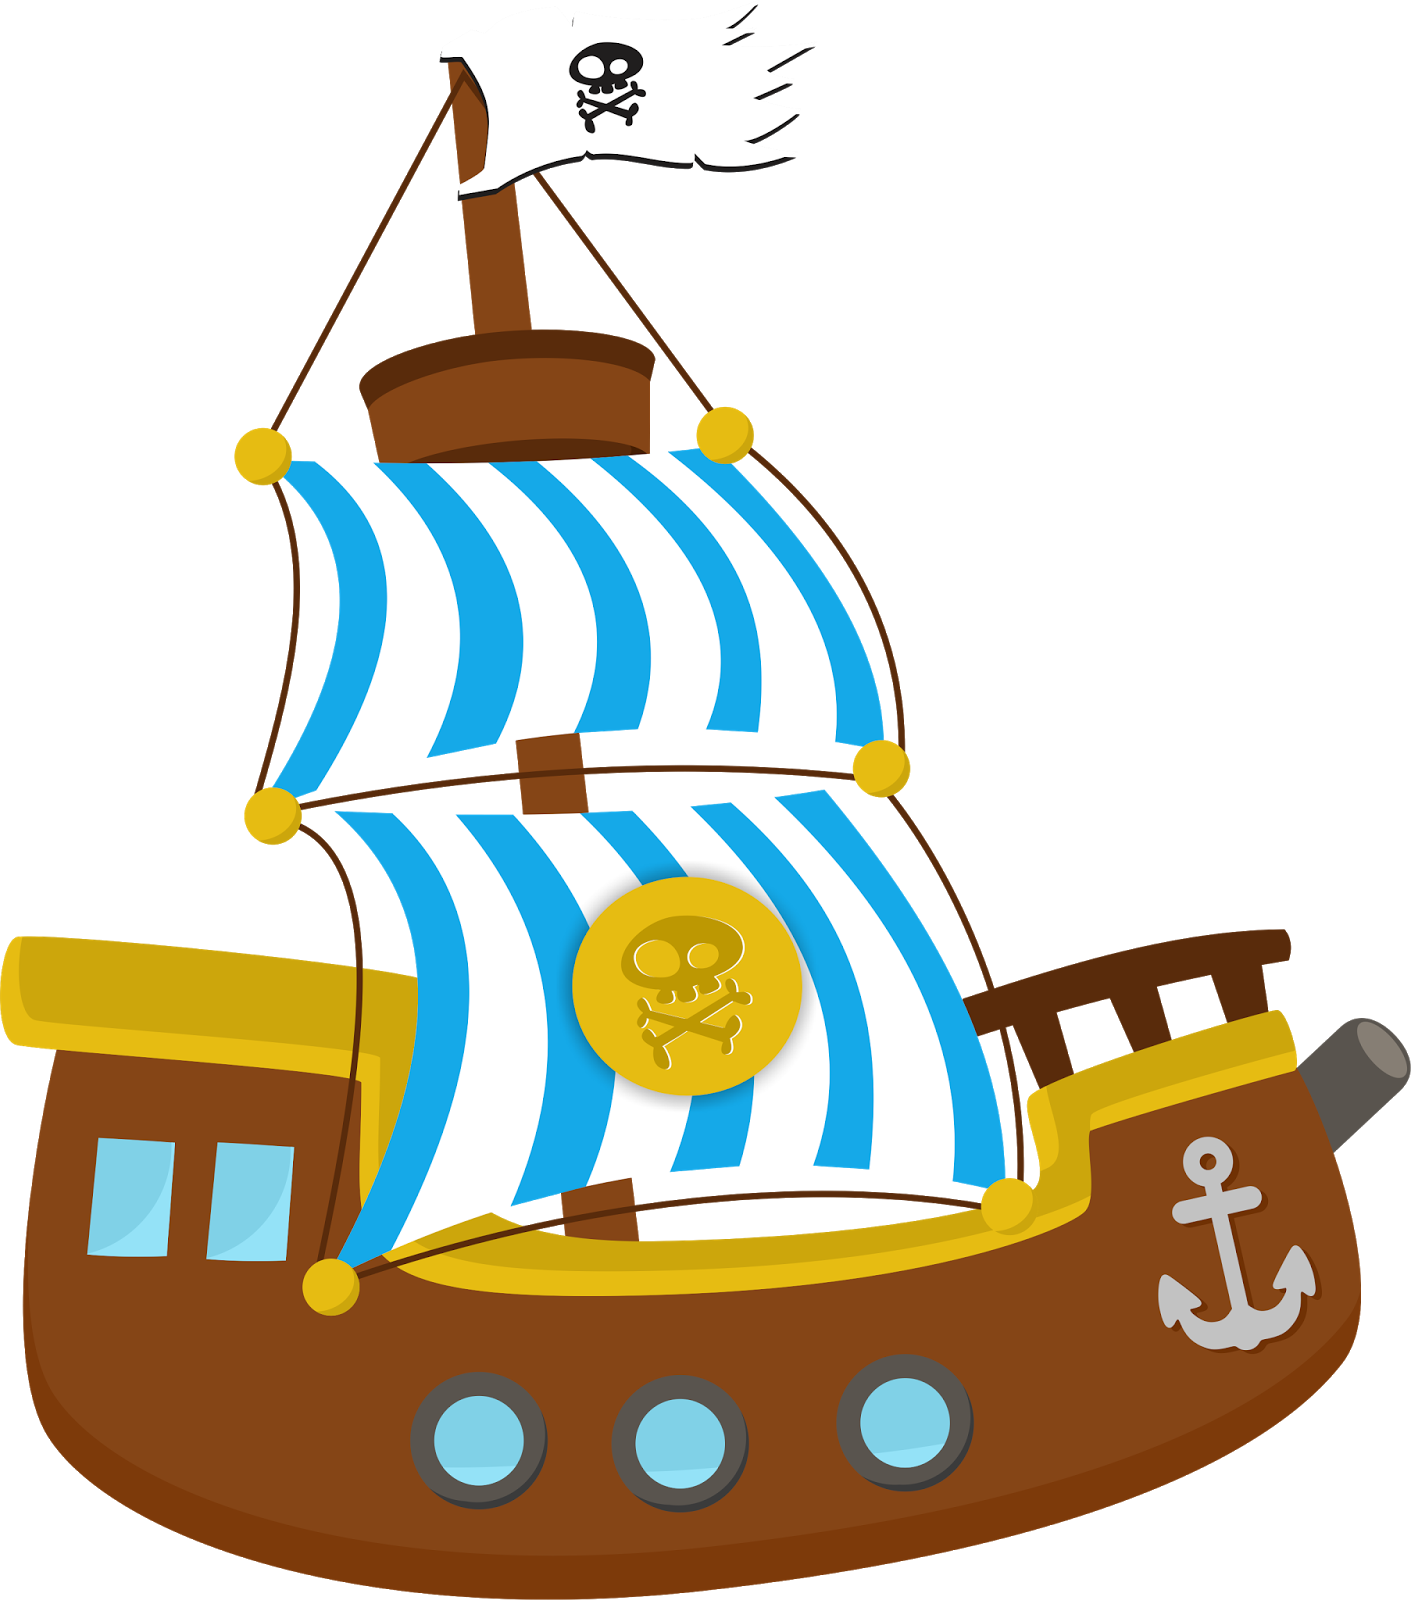 pirates clipart family